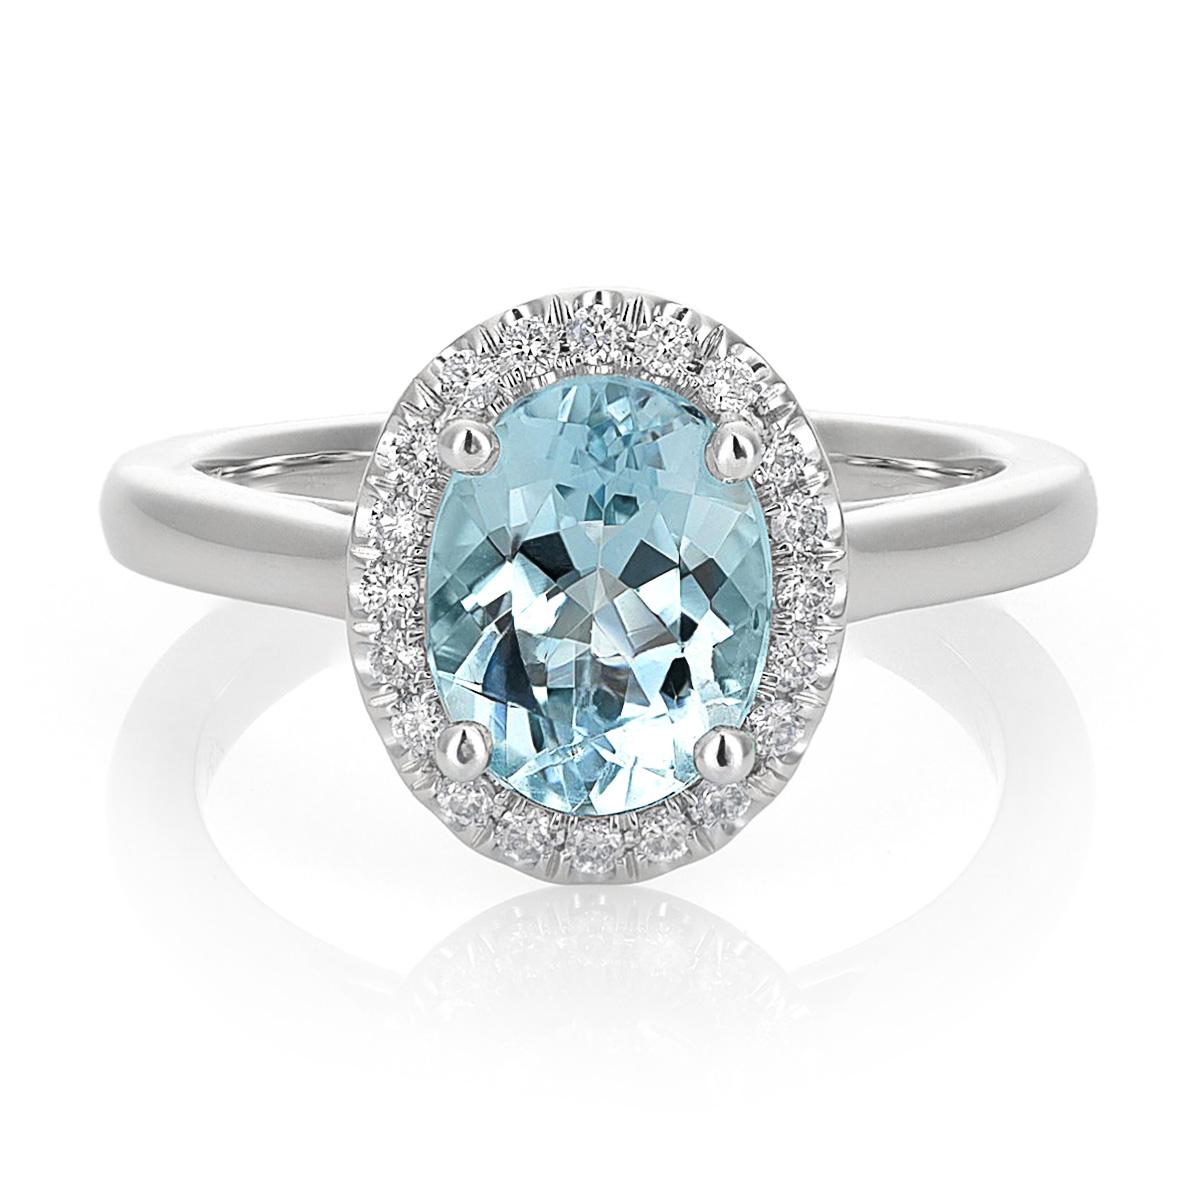 1.14 Carats Natural Aquamarine Diamonds set in 14K White Gold In New Condition For Sale In Los Angeles, CA